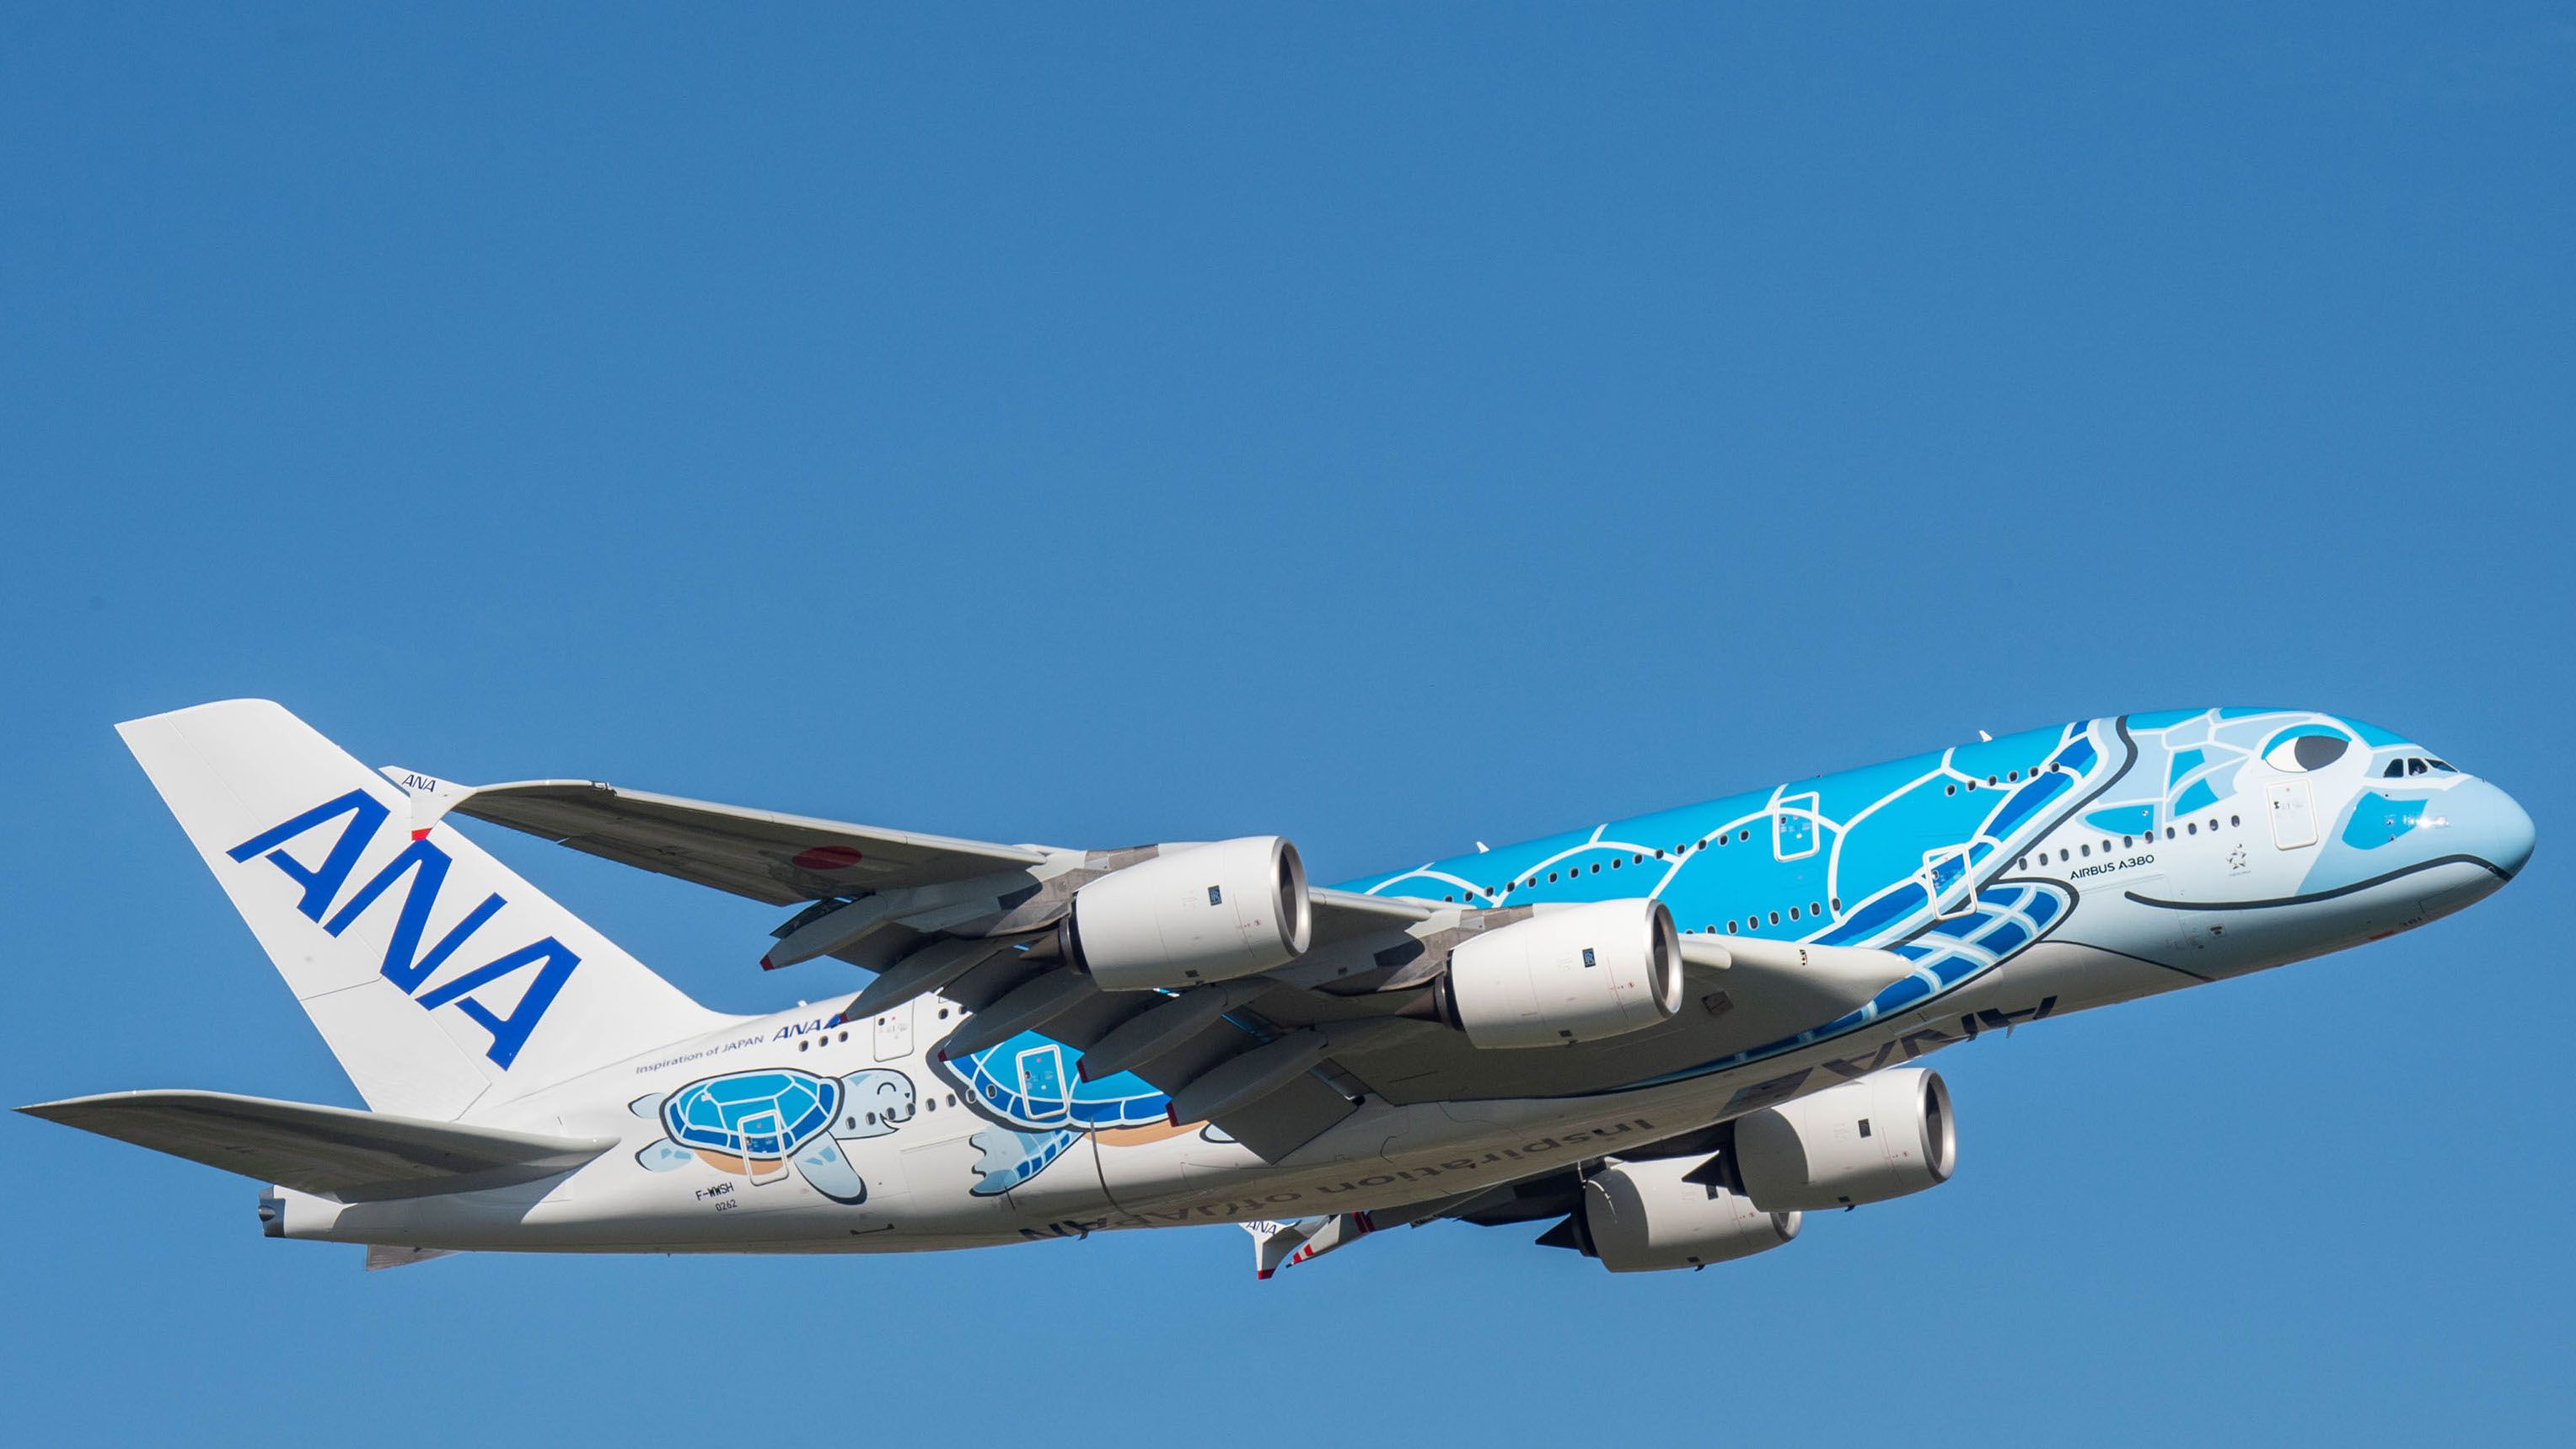 Why Did ANA Take On The Airbus A380?